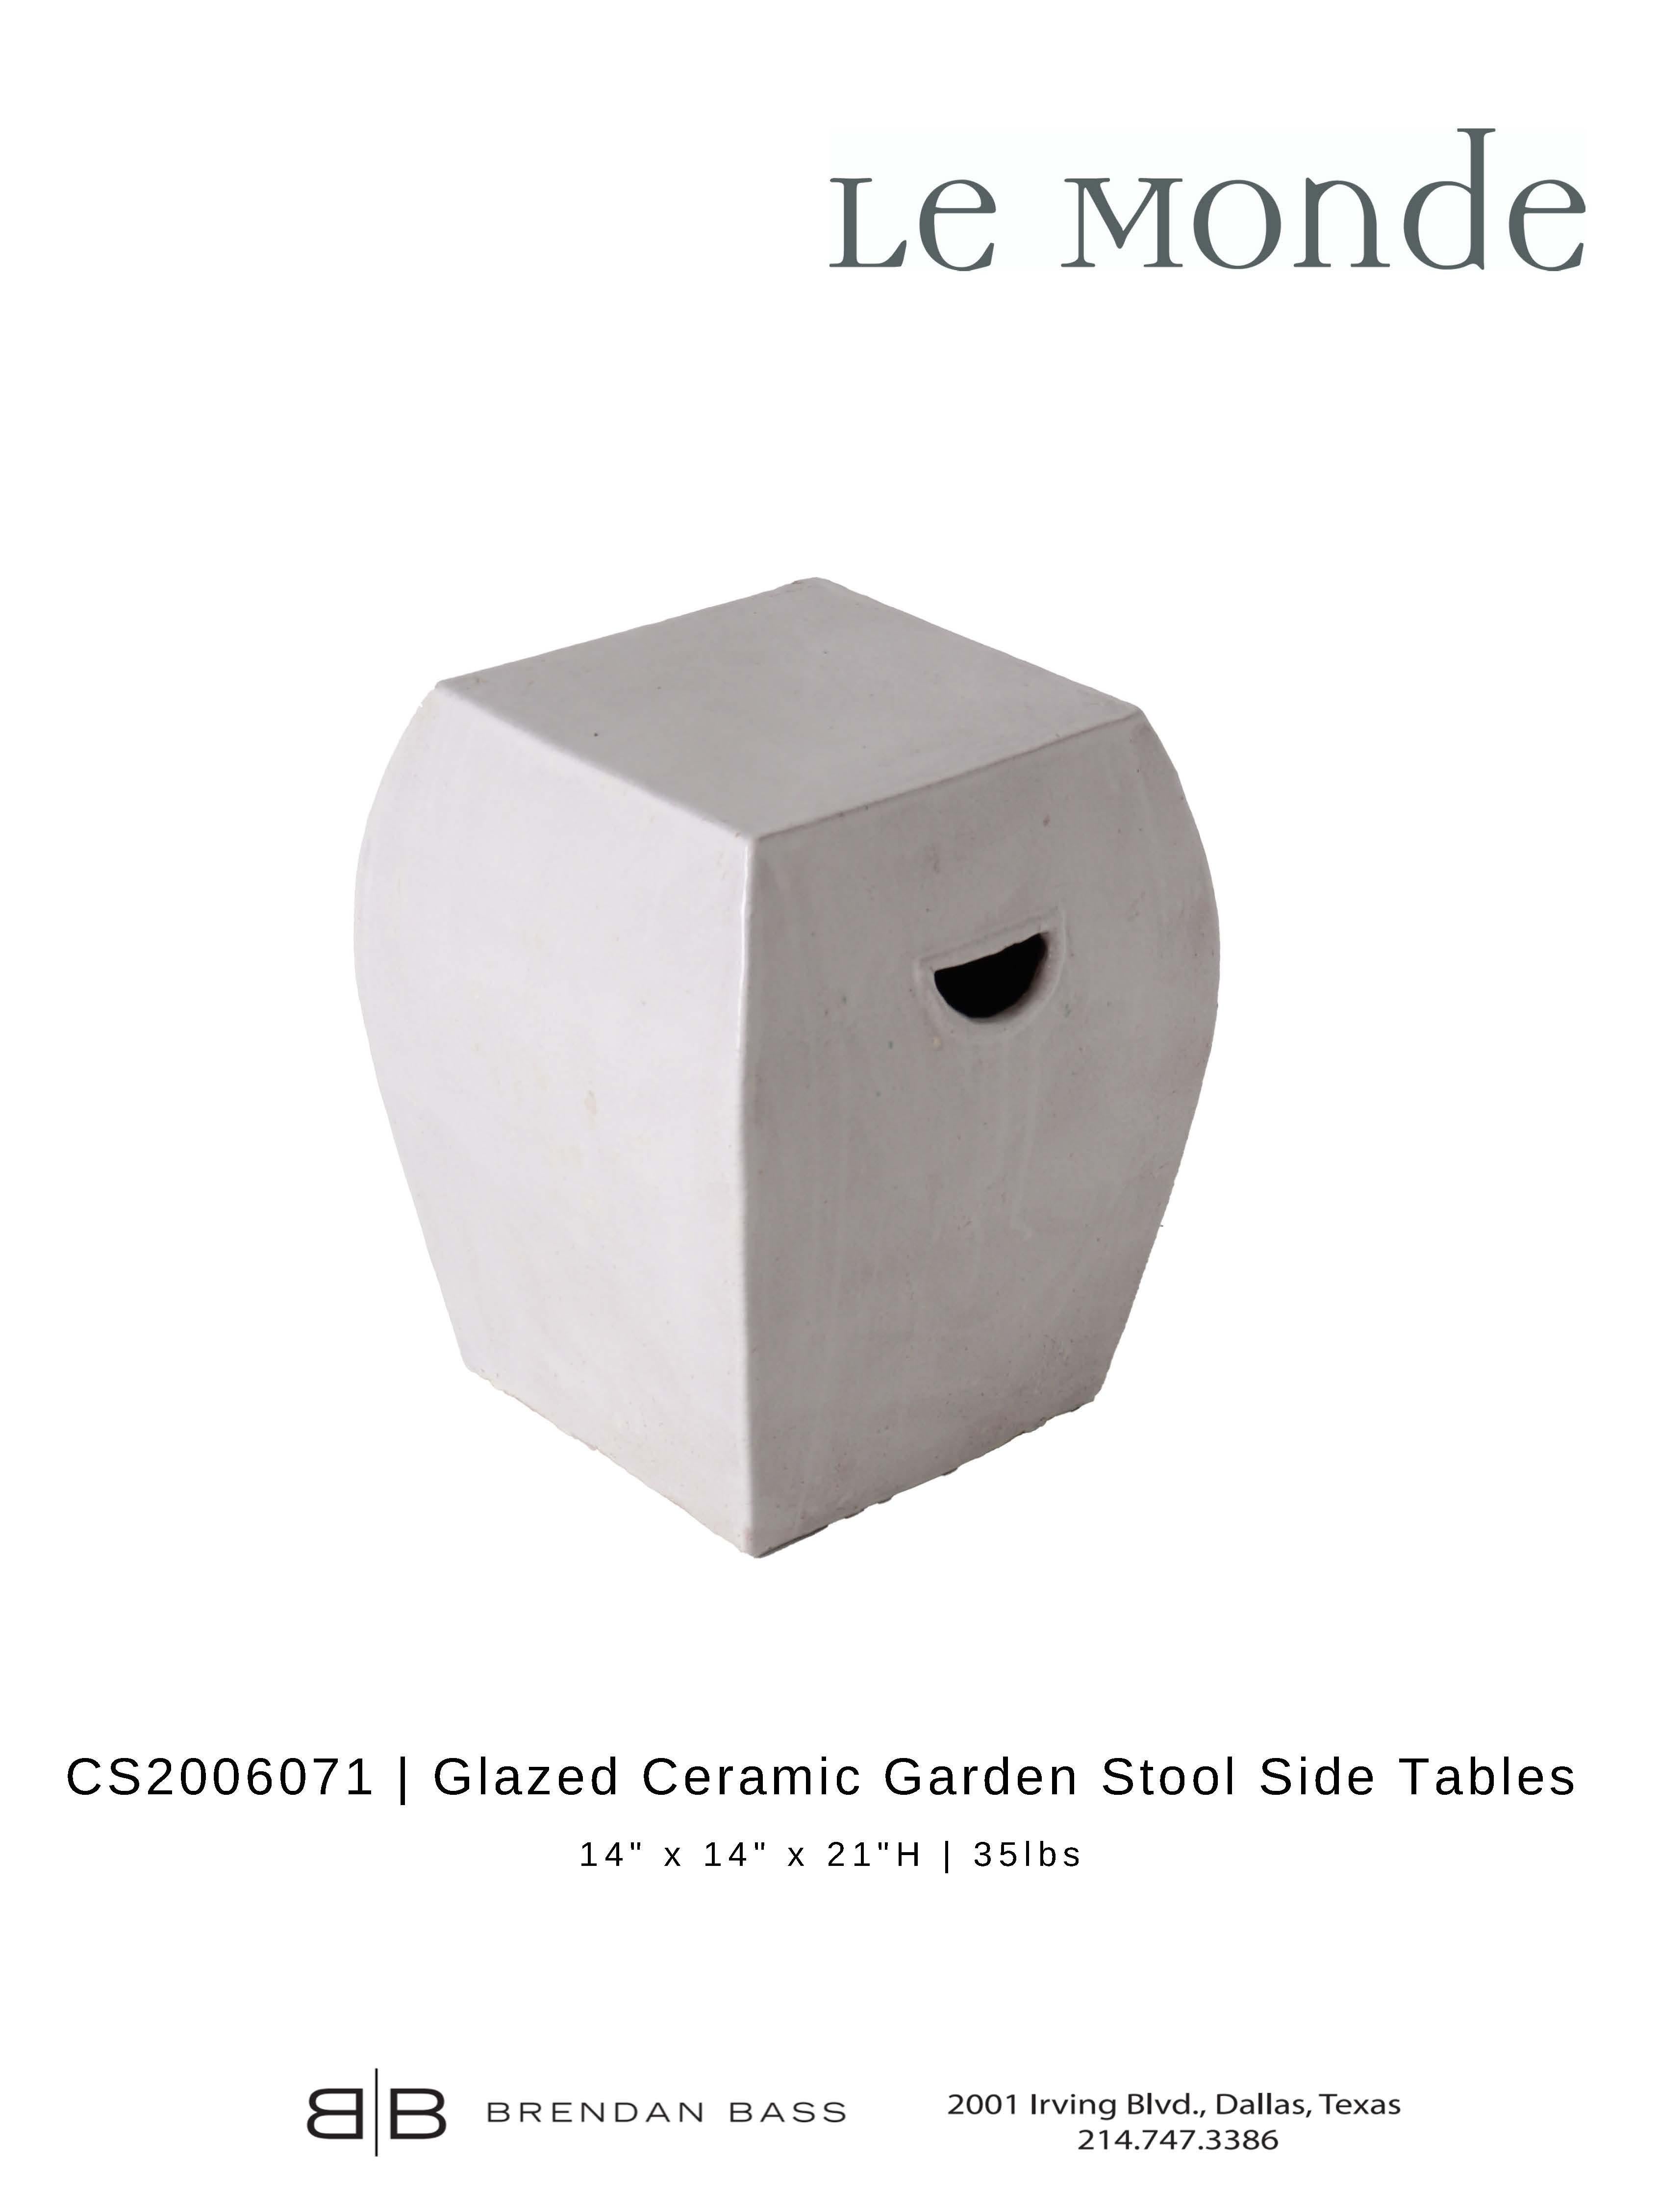 Glazed Ceramic Garden Stool Side Tables In Good Condition For Sale In Dallas, TX